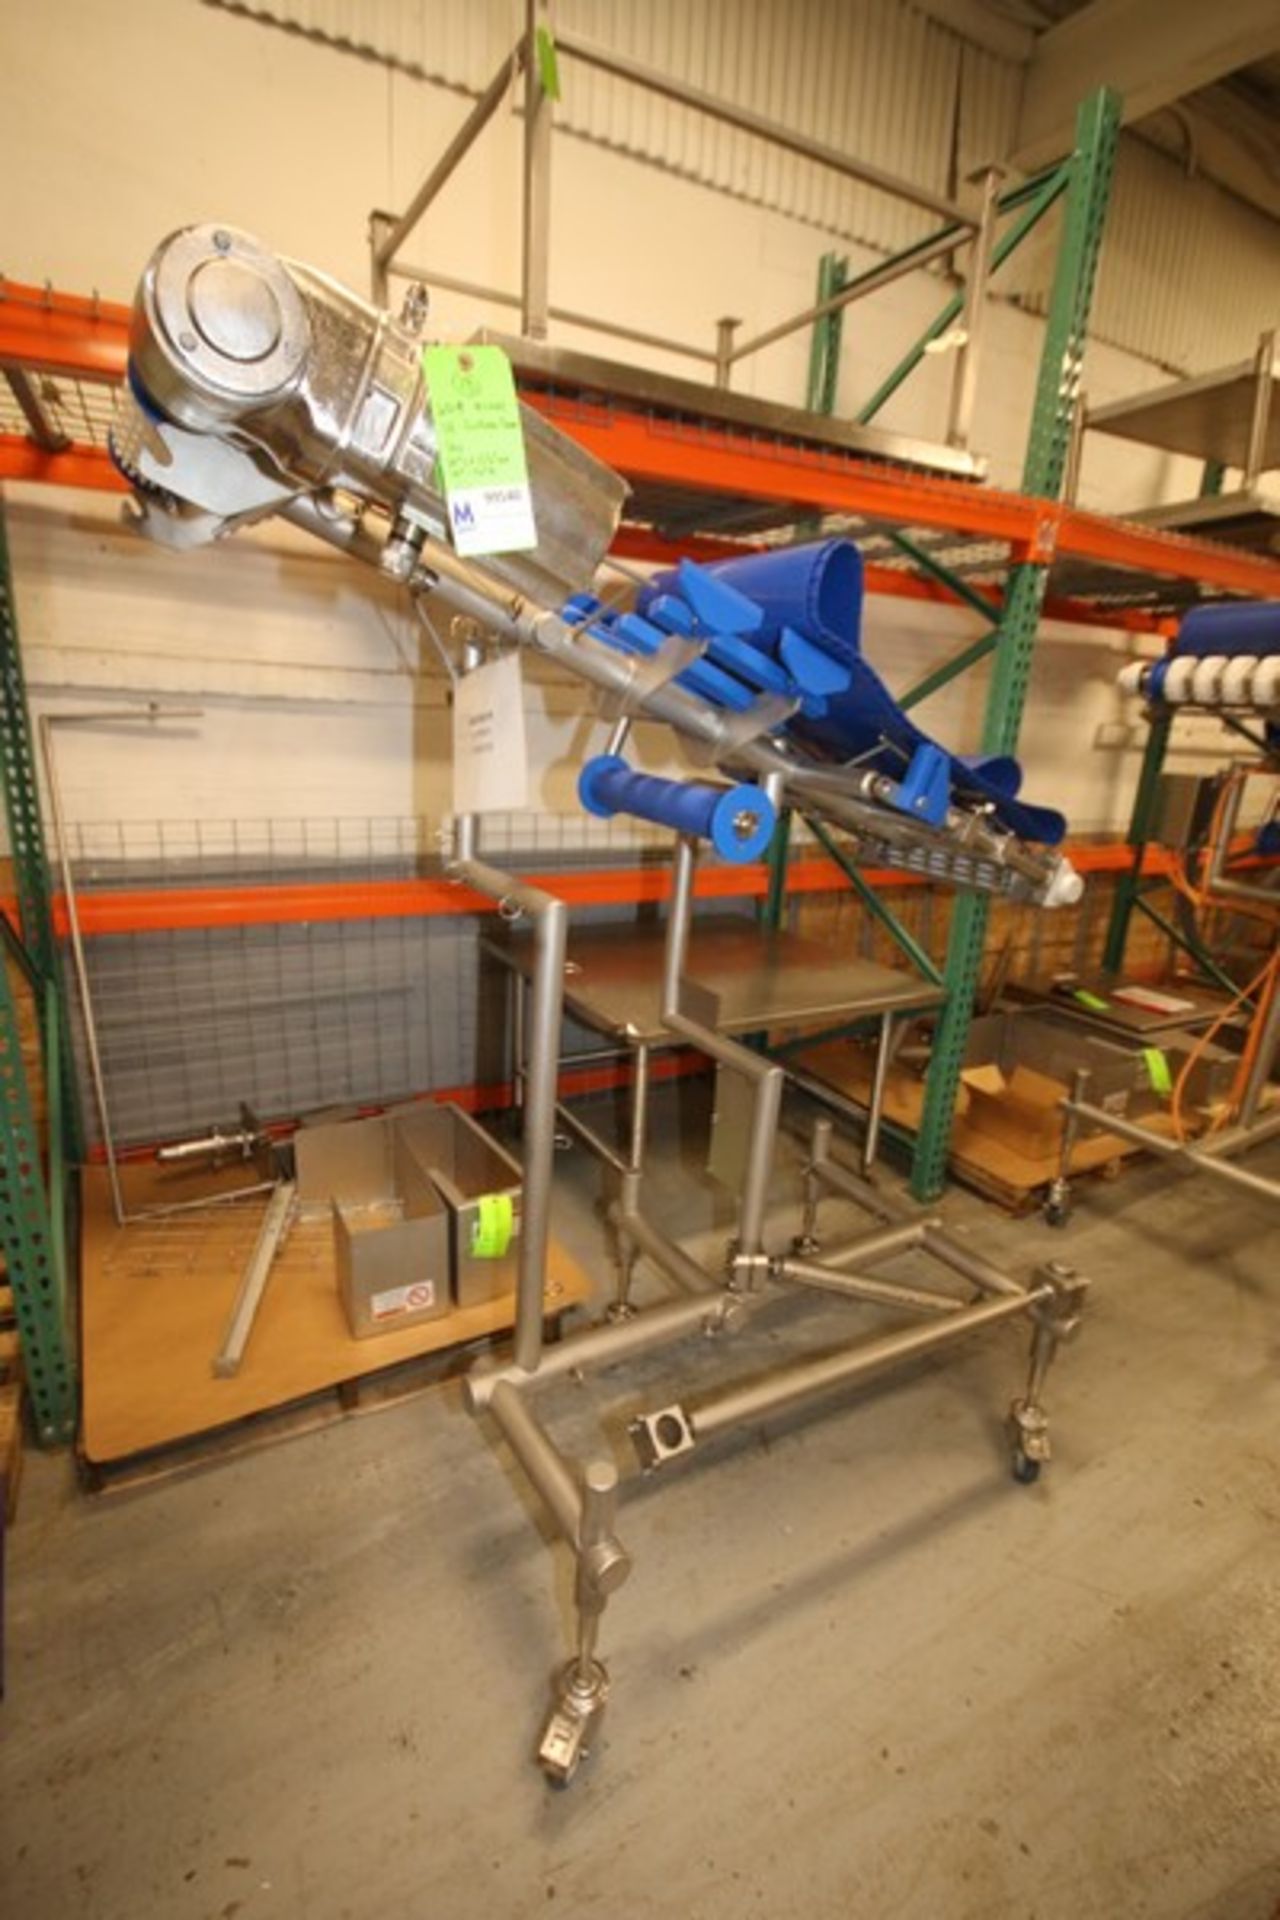 2019 Alimec Aprox. 70" L x 15.5"W x 50" to 74" S/S Inclined Belt Conveyor, with Bauer S/S Drive